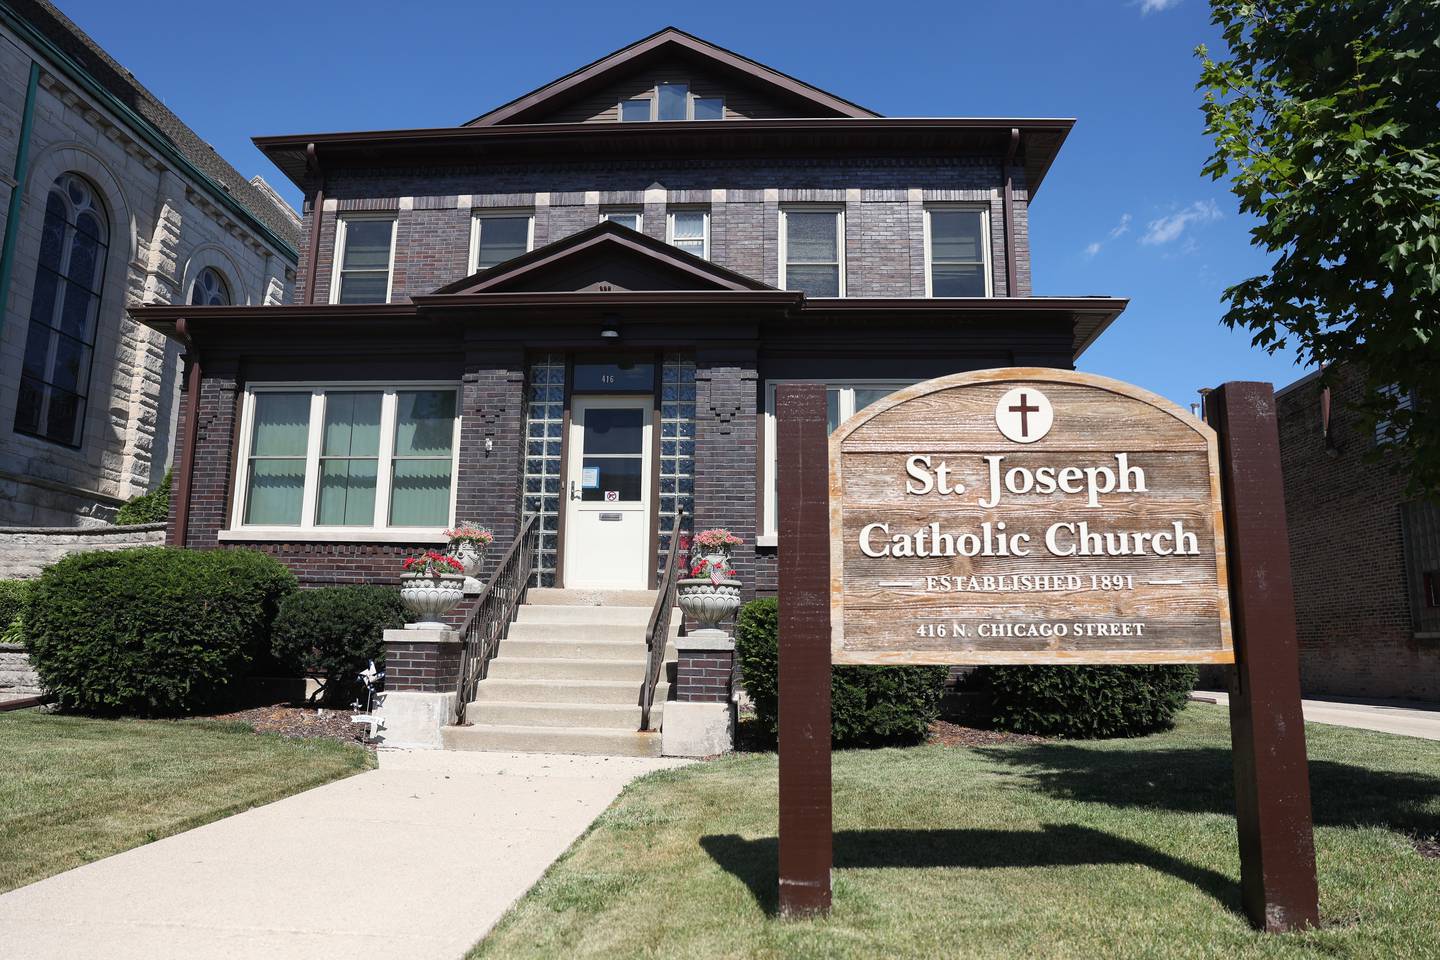 For years, St. Joseph has been the home of Rev. Tim Andres, the outgoing pastor of St. Joseph's Church in Joliet.